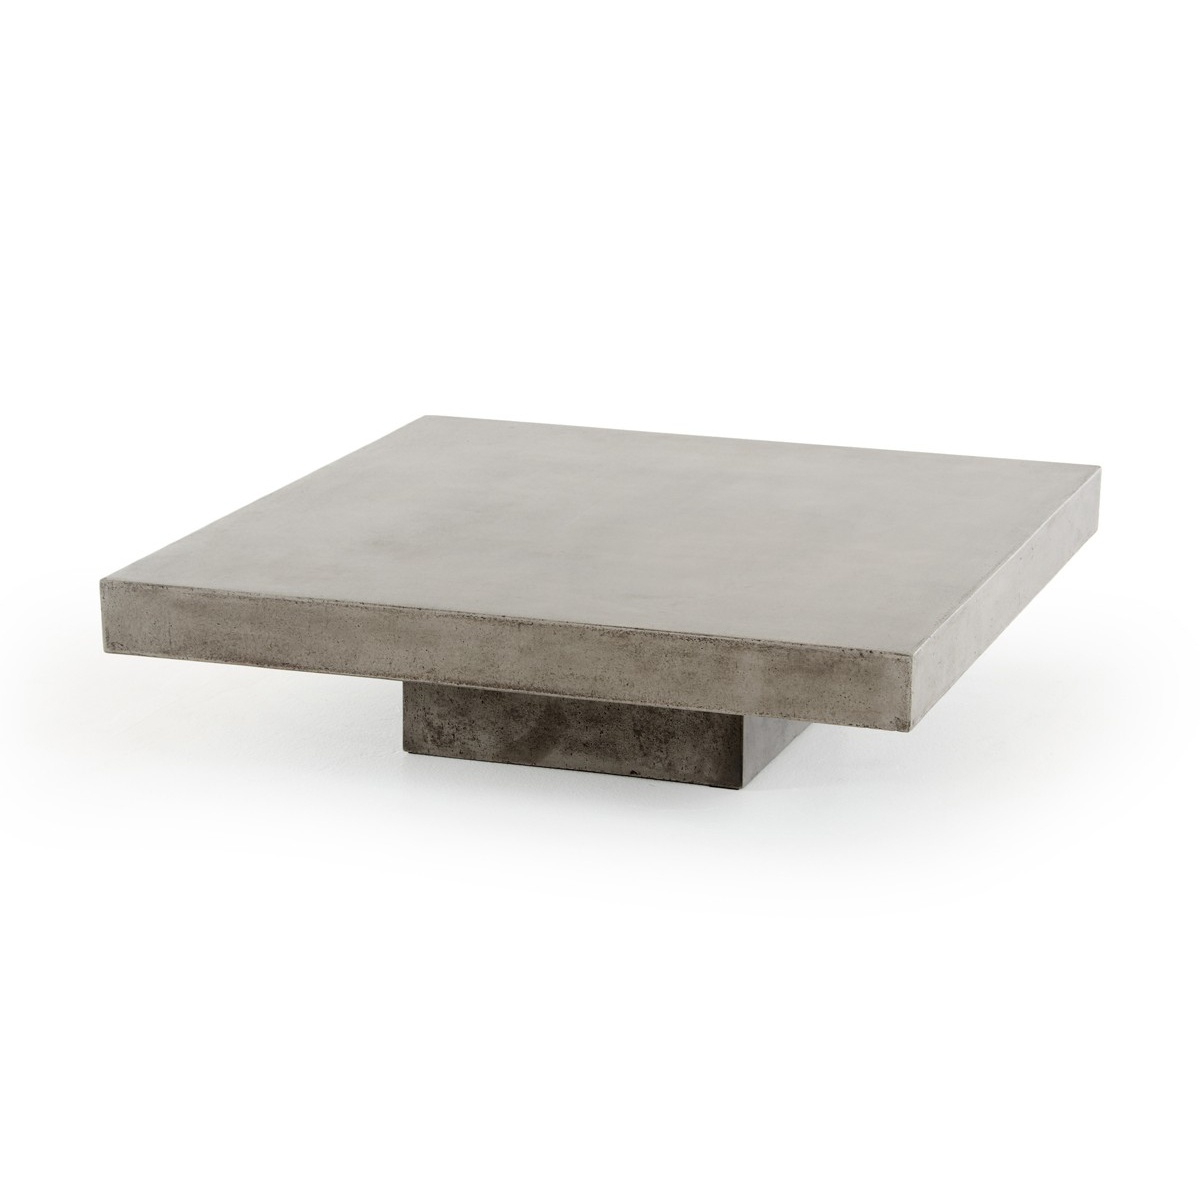 Concrete Coffee Table | Event Trade Show Furniture Rental | FormDecor